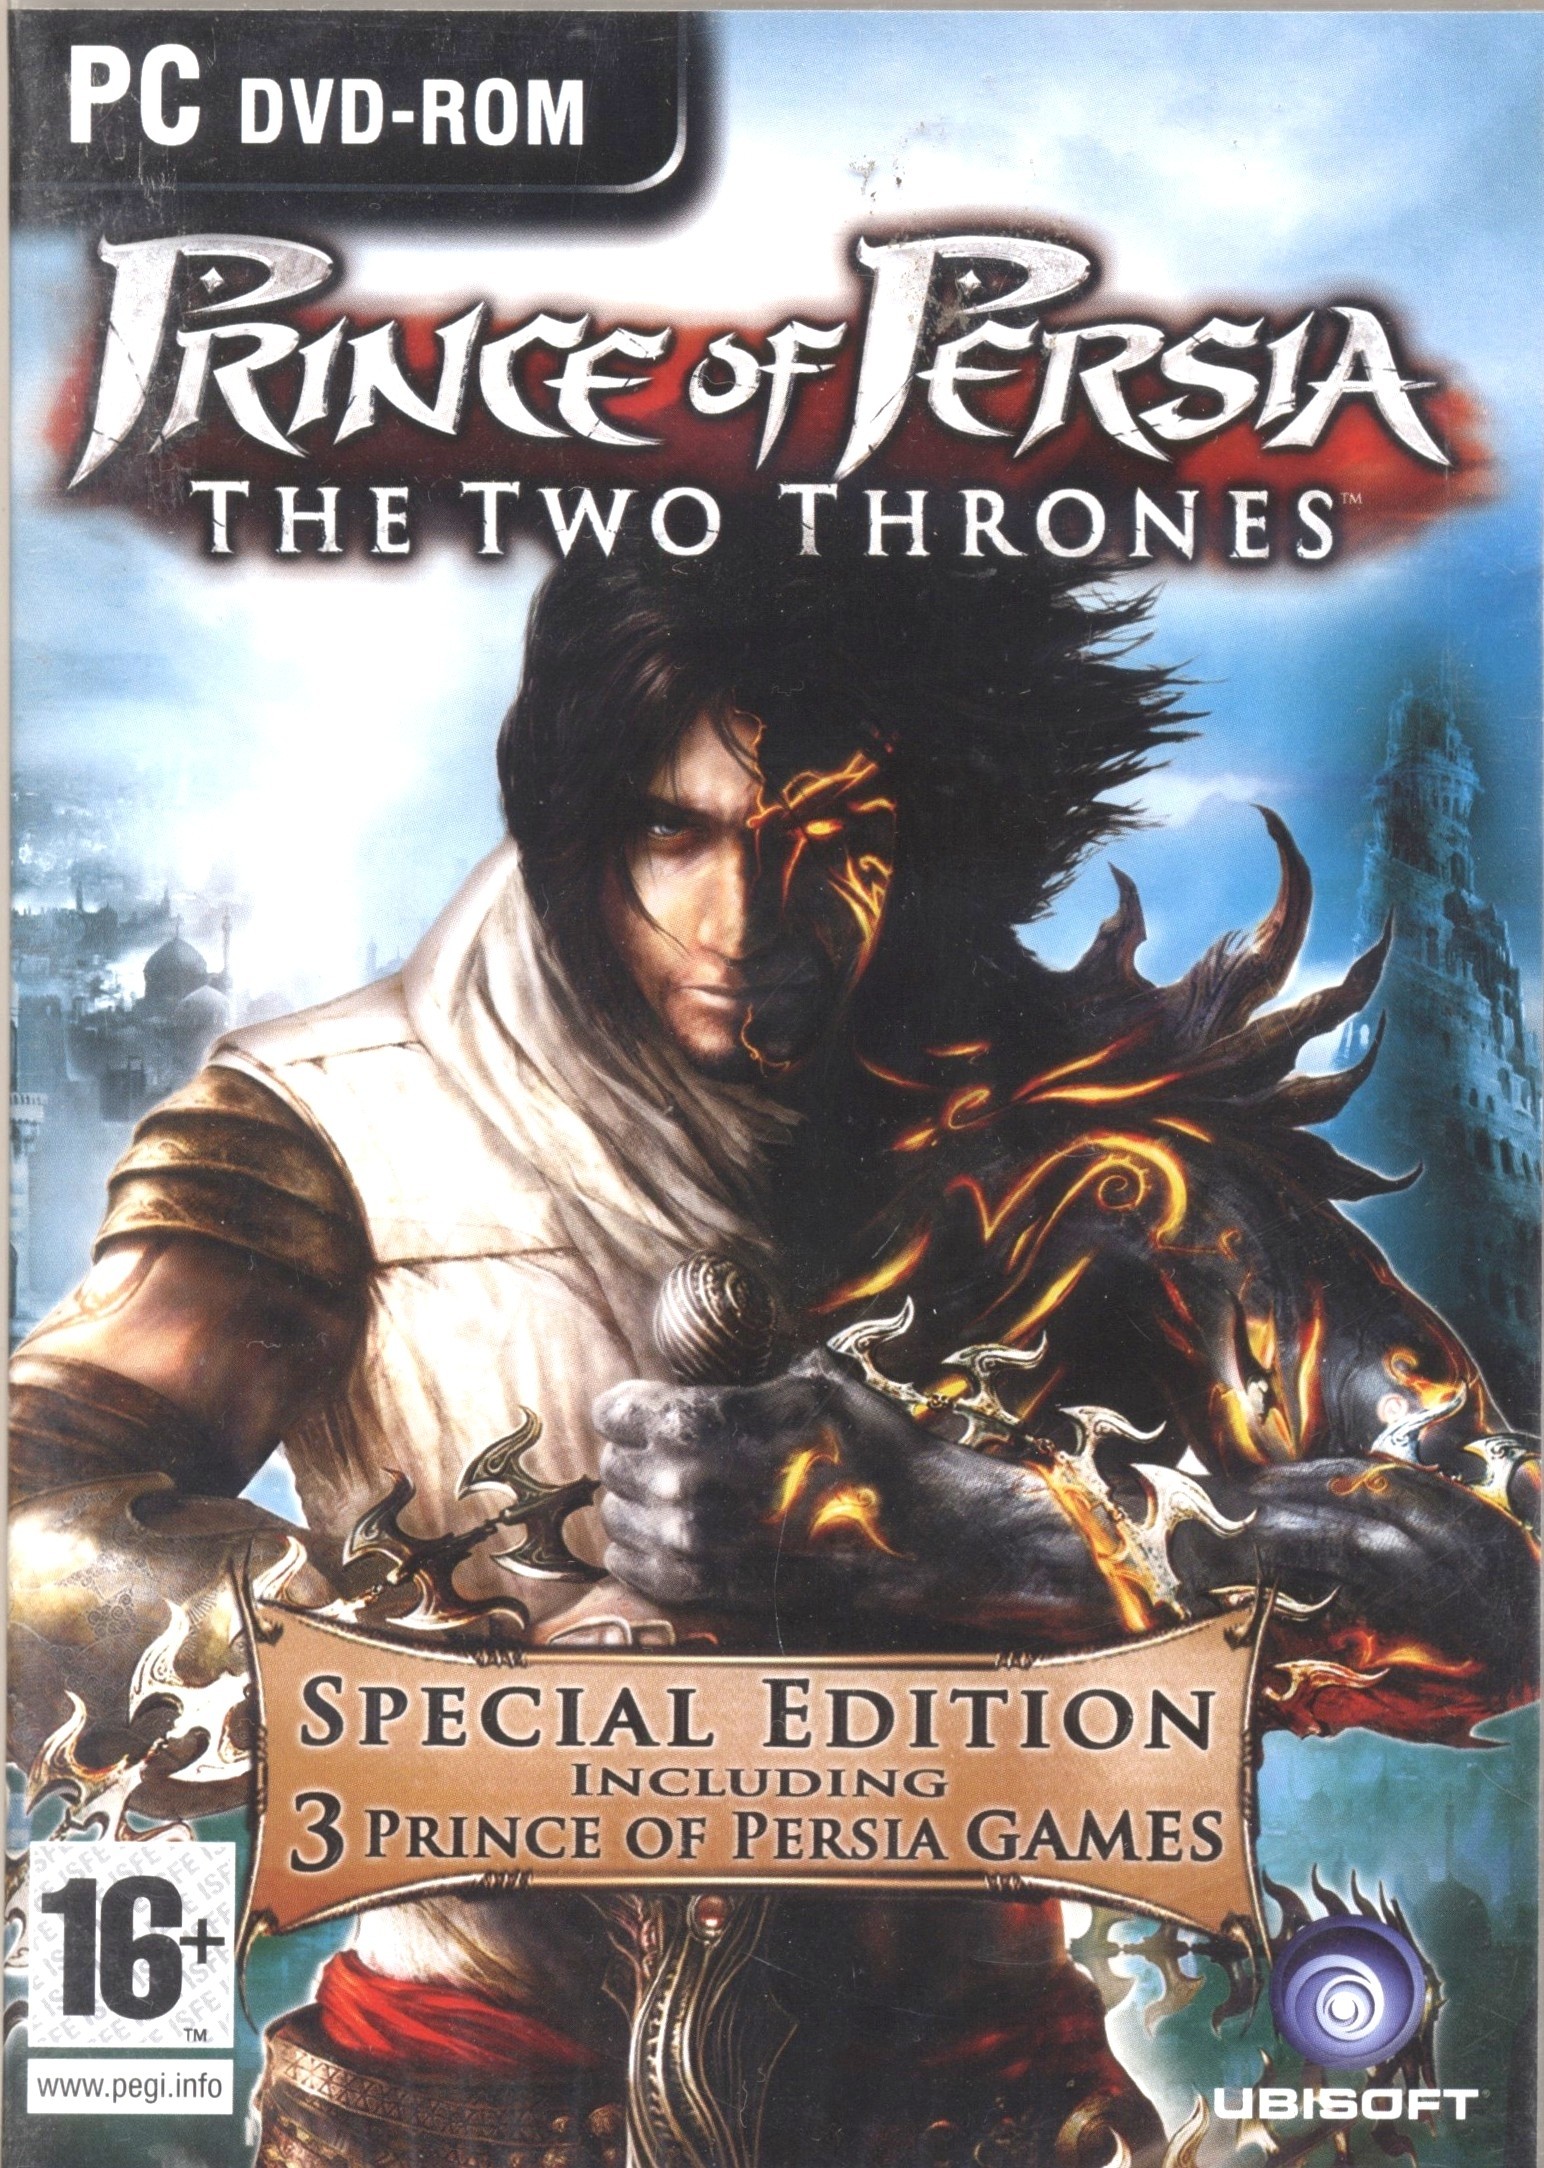 Prince of Persia The Two Thrones Free Download Torrent